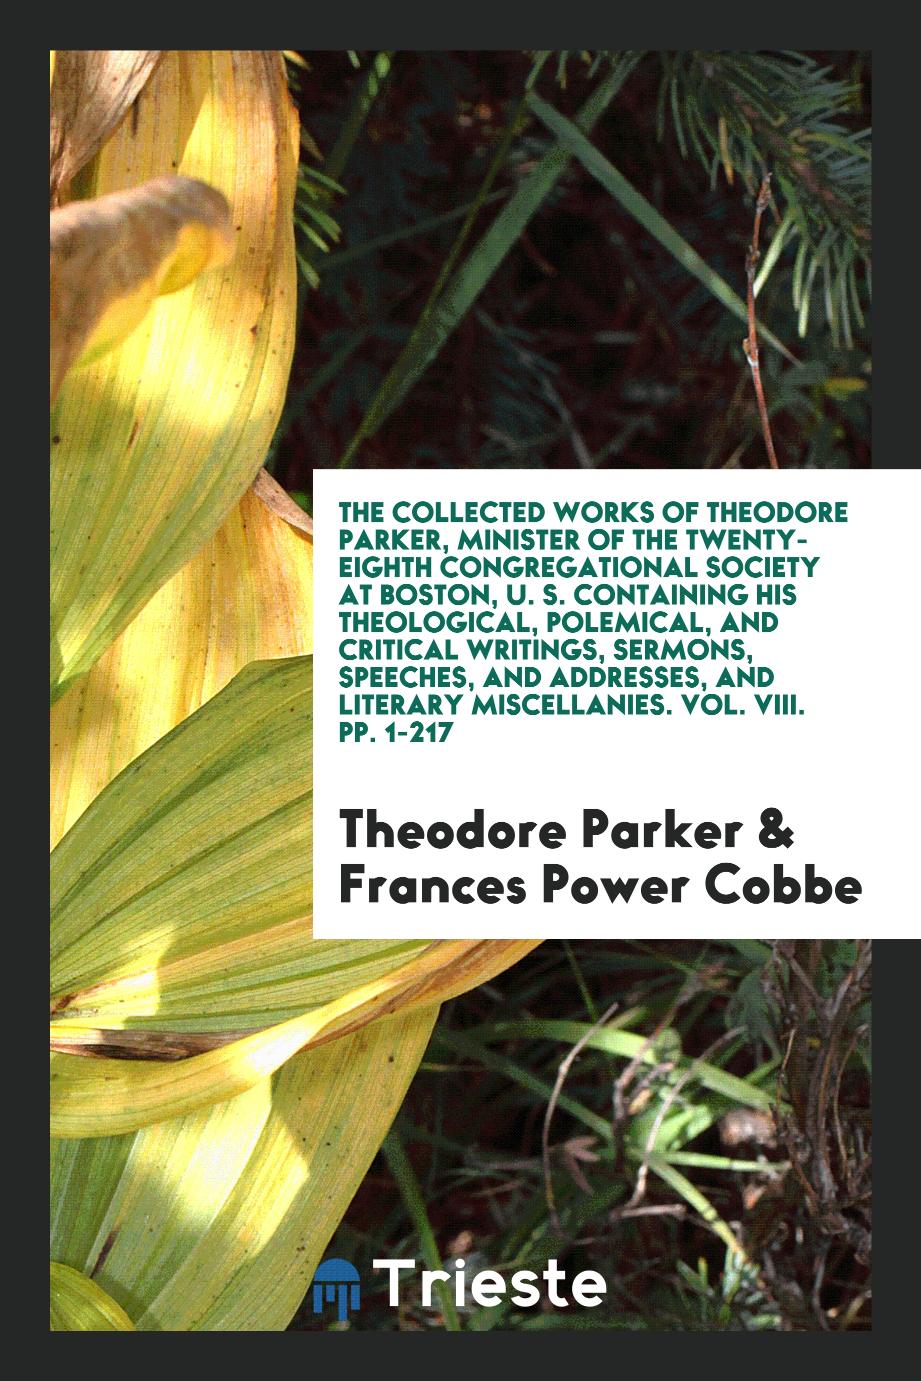 The Collected Works of Theodore Parker, Minister of the Twenty-Eighth Congregational Society at Boston, U. S. Containing His Theological, Polemical, and Critical Writings, Sermons, Speeches, and Addresses, and Literary Miscellanies. Vol. VIII. pp. 1-217